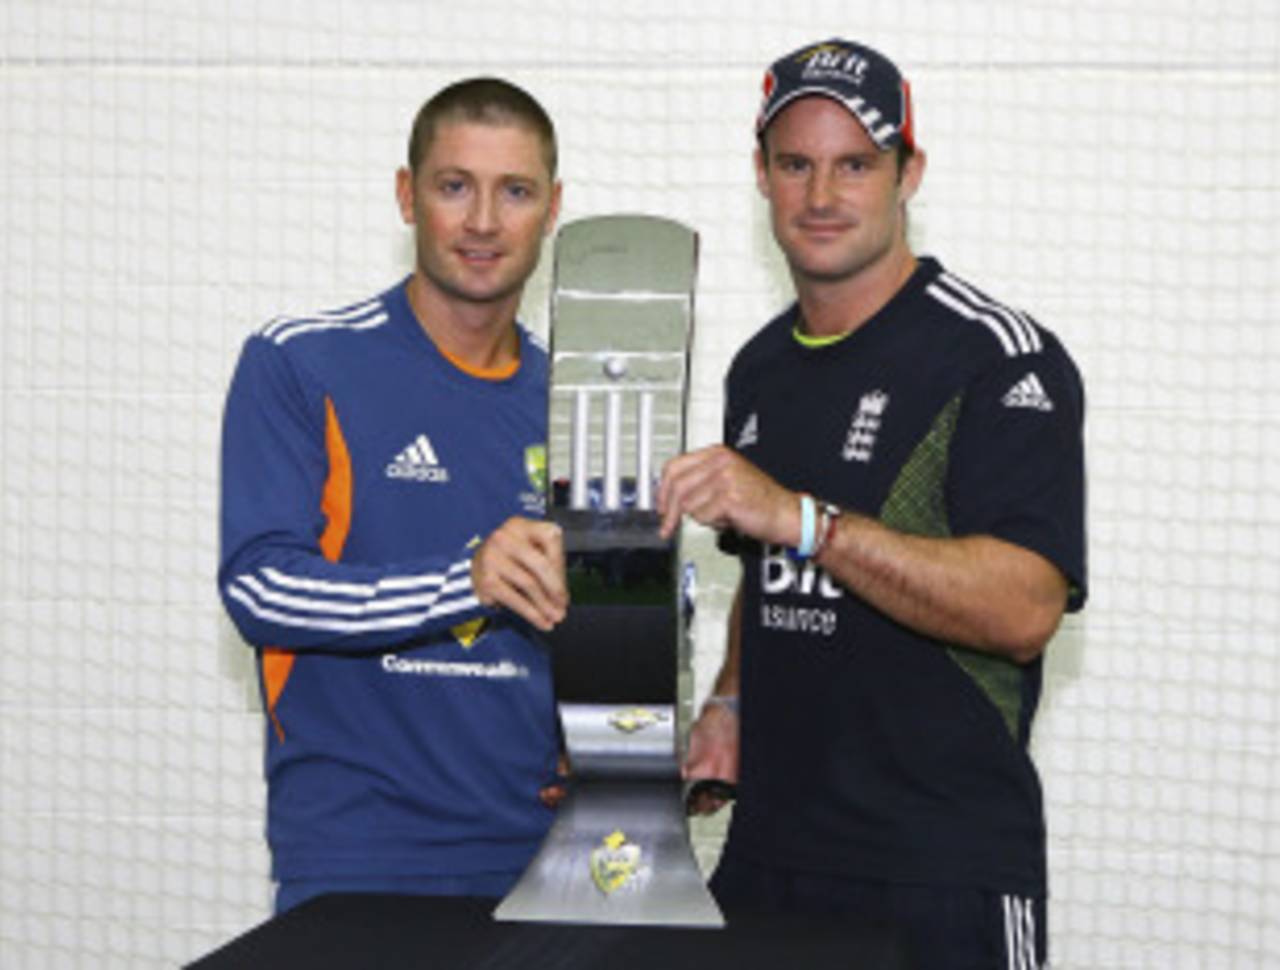 Michael Clarke and Andrew Strauss pose with the one-day trophy, Melbourne, January 15, 2011